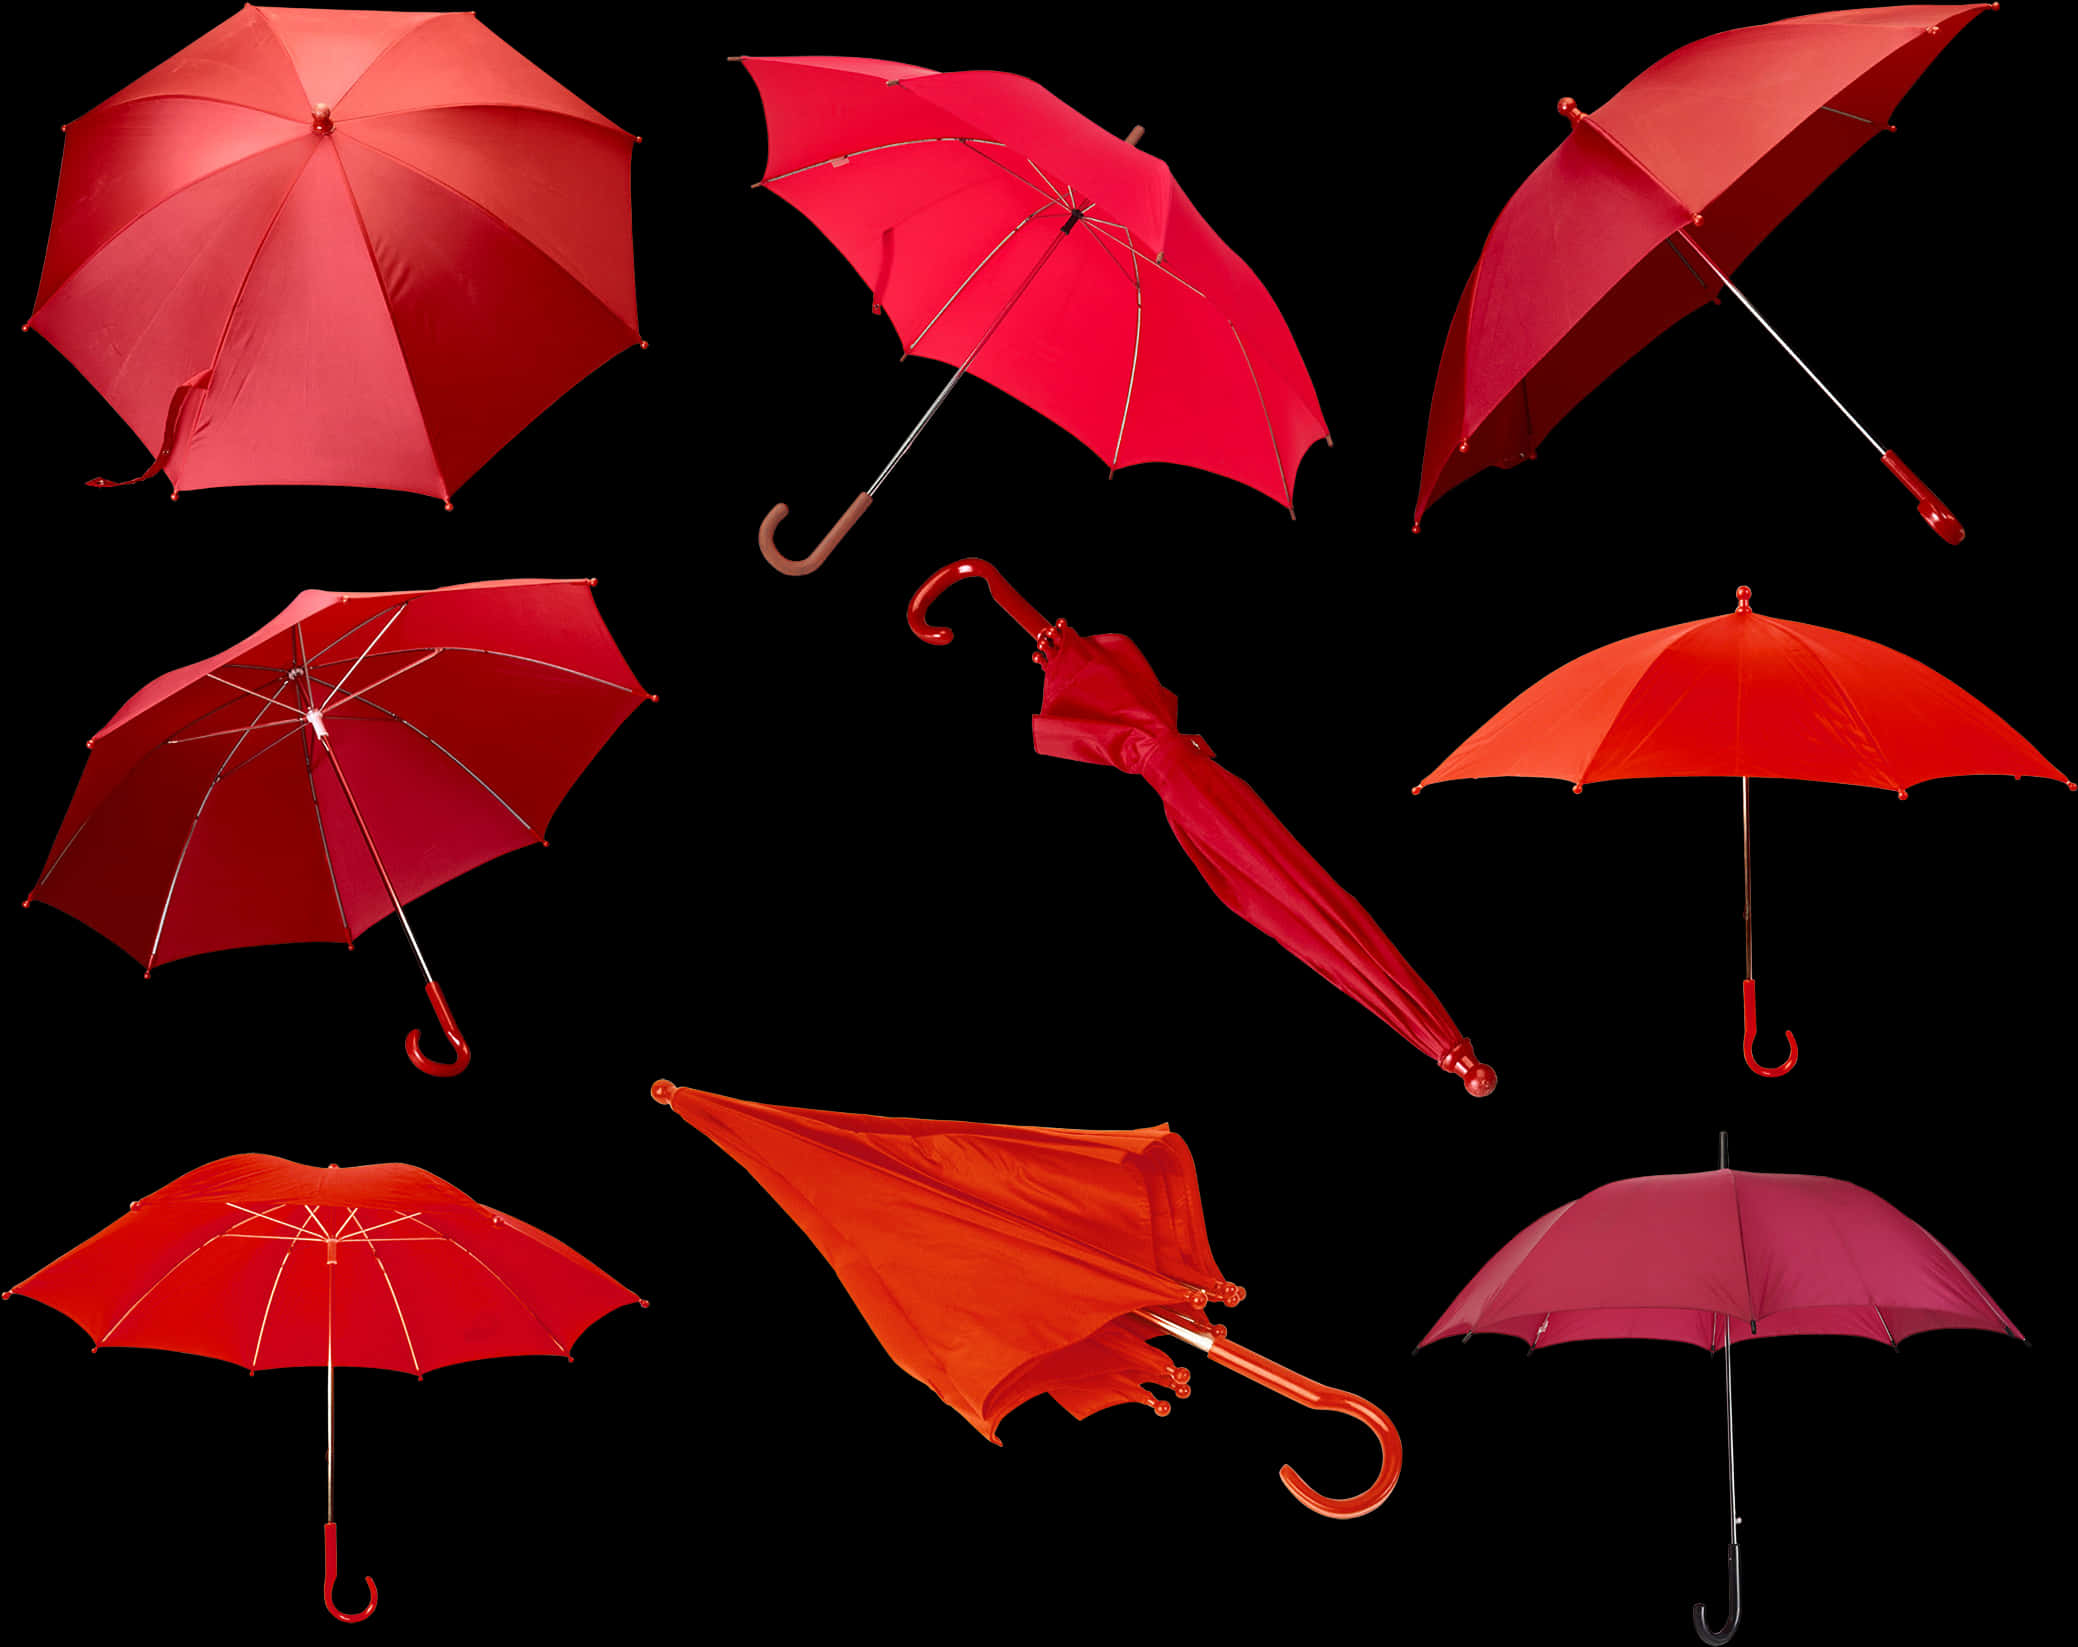 A Collage Of Different Colored Umbrellas